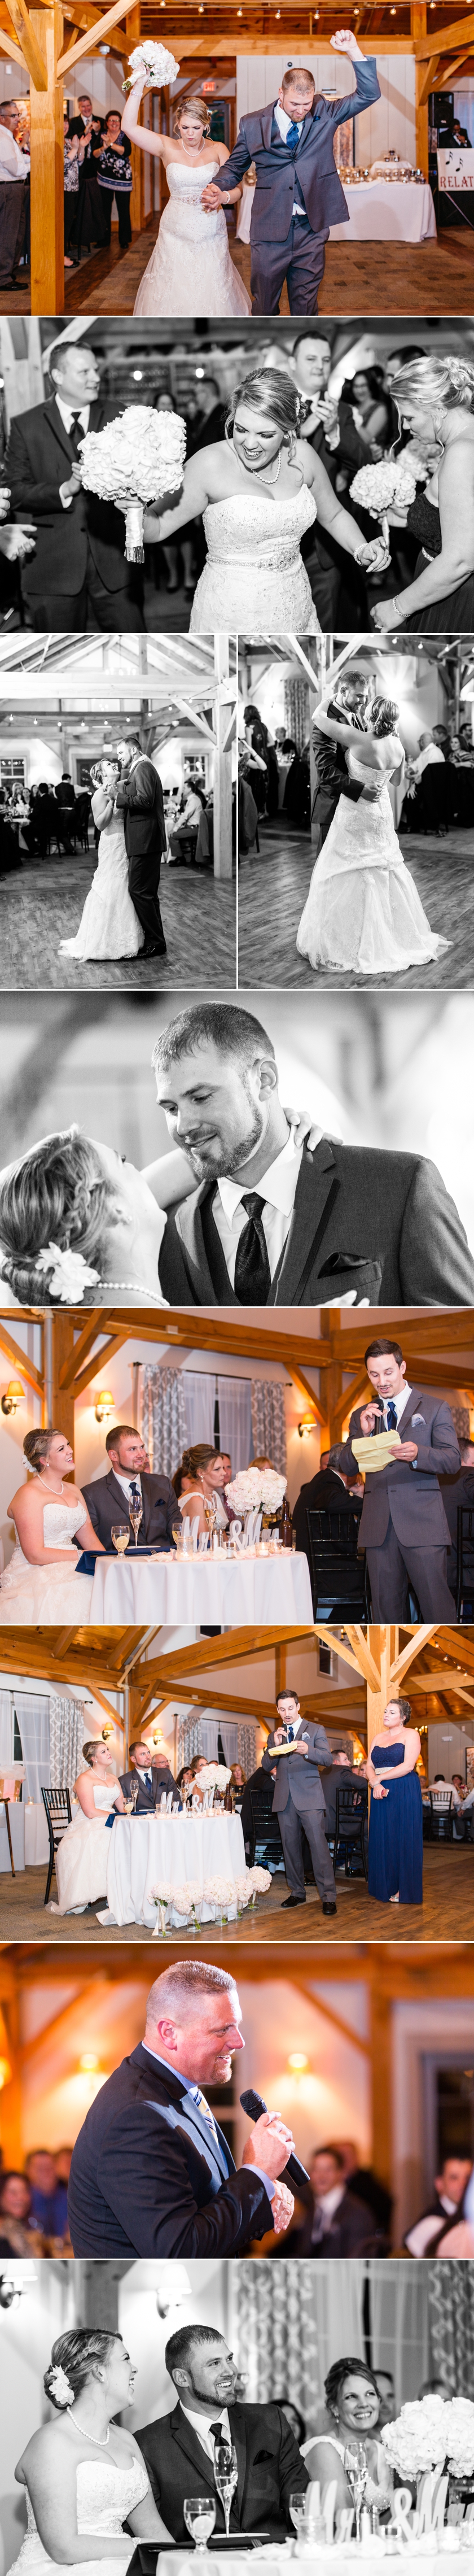 photo collage of first dance and speeches at nichole and george's classic wedding at the wight barn in sturbridge massachusetts